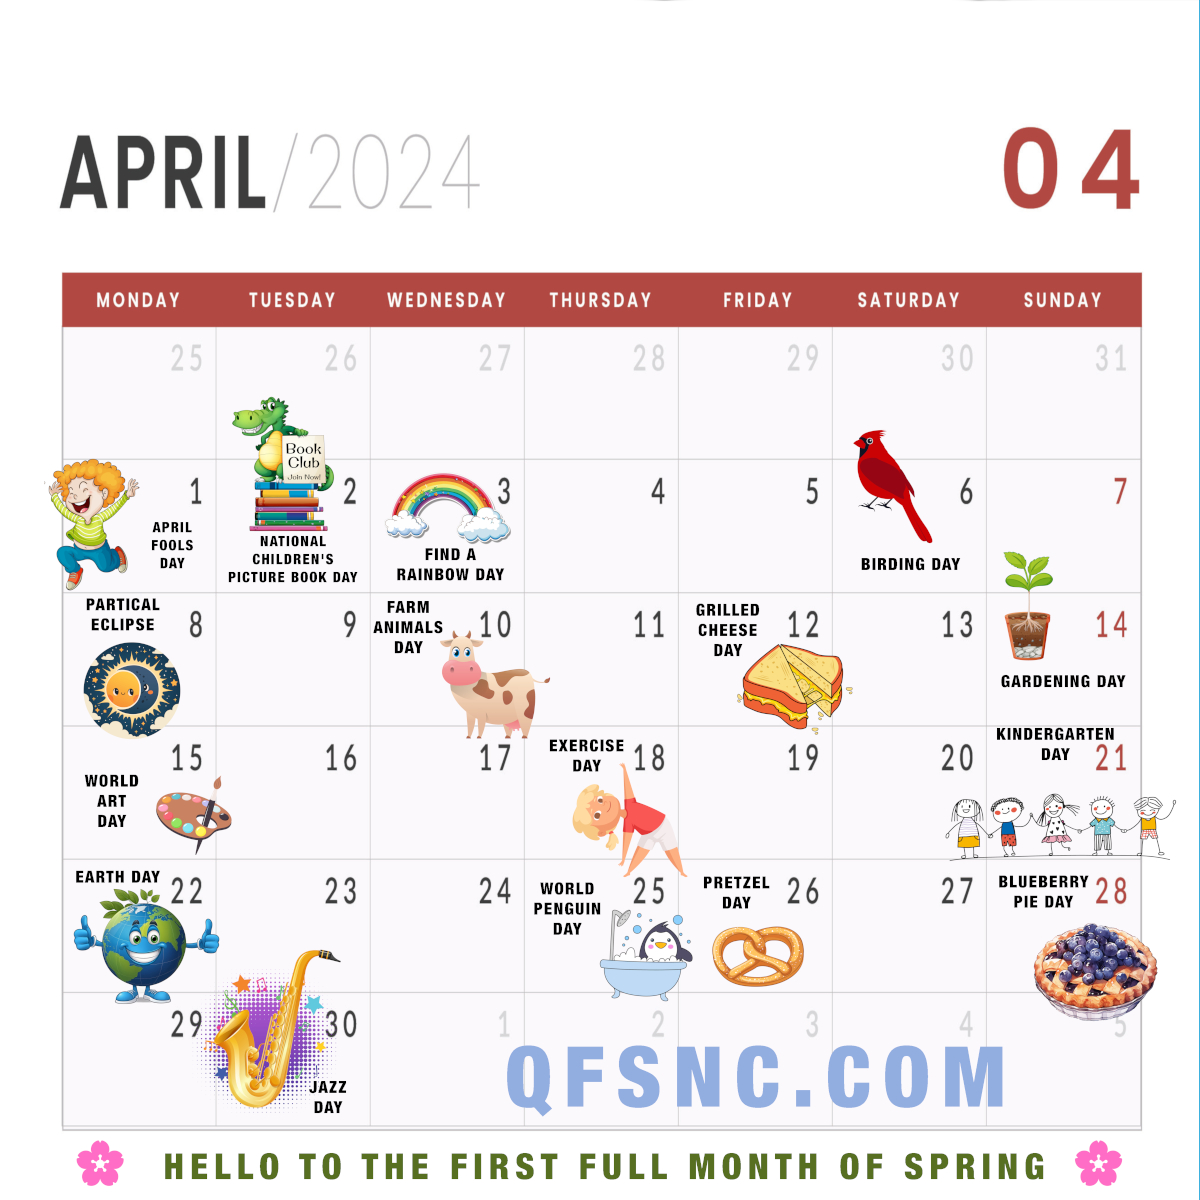 April is full of many fun and kid friendly activities. Which are you looking forward to most? 😊😊😊😊😊😊😊😊😊😊 The Team At Quality Family Services #CharlotteNC #NorthCarolina